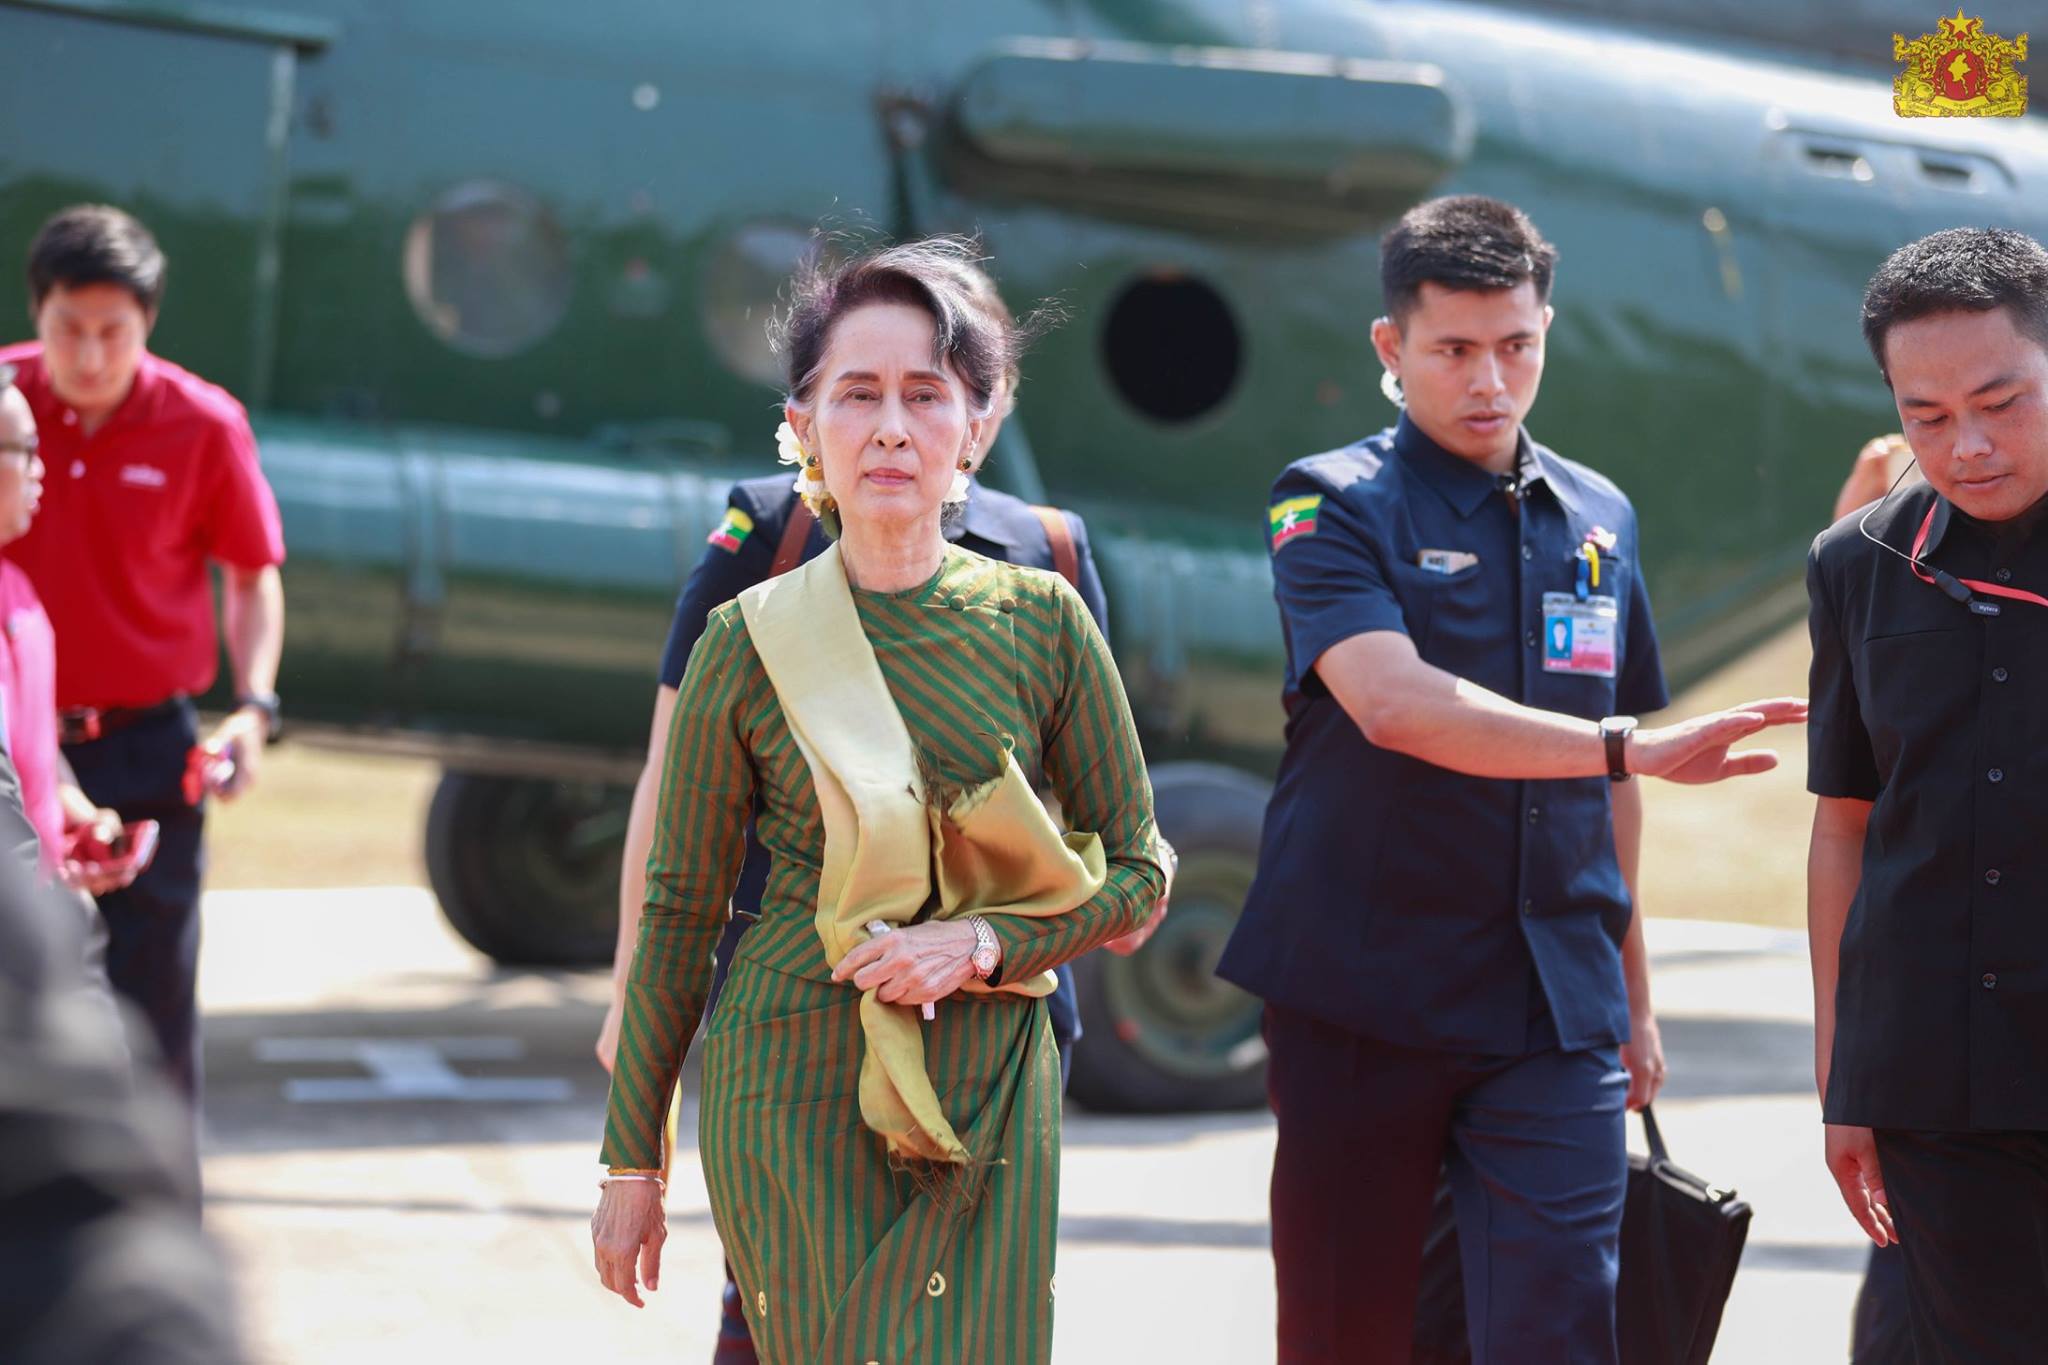 State Counsellor Aung San Suu Kyi arrives in Myaungmya, Ayeyawady Region, for a “Peace Talk” on April 10, 2018. Photo: Office of the State Counsellor